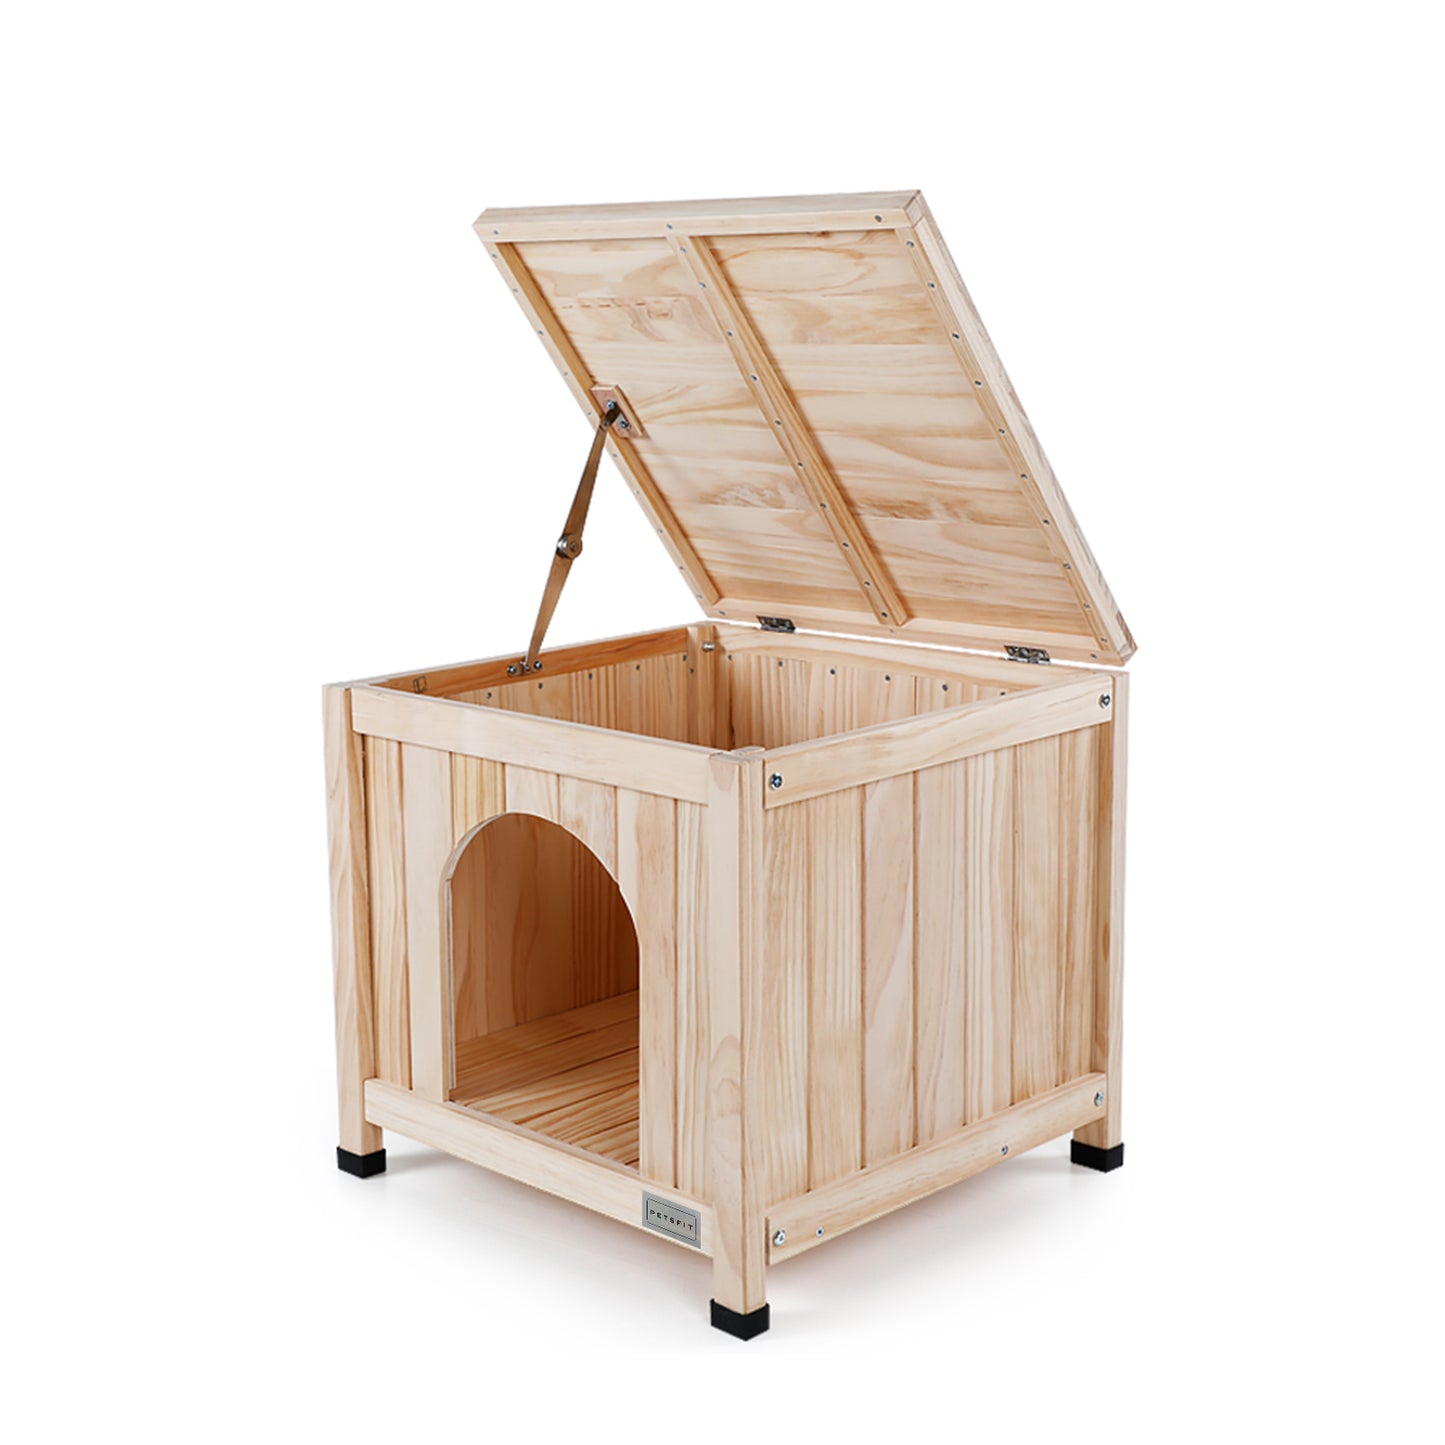 Petsfit-Indoor-Dog-House-Wood-with-Elevated-and-Ventilate-Floor-03